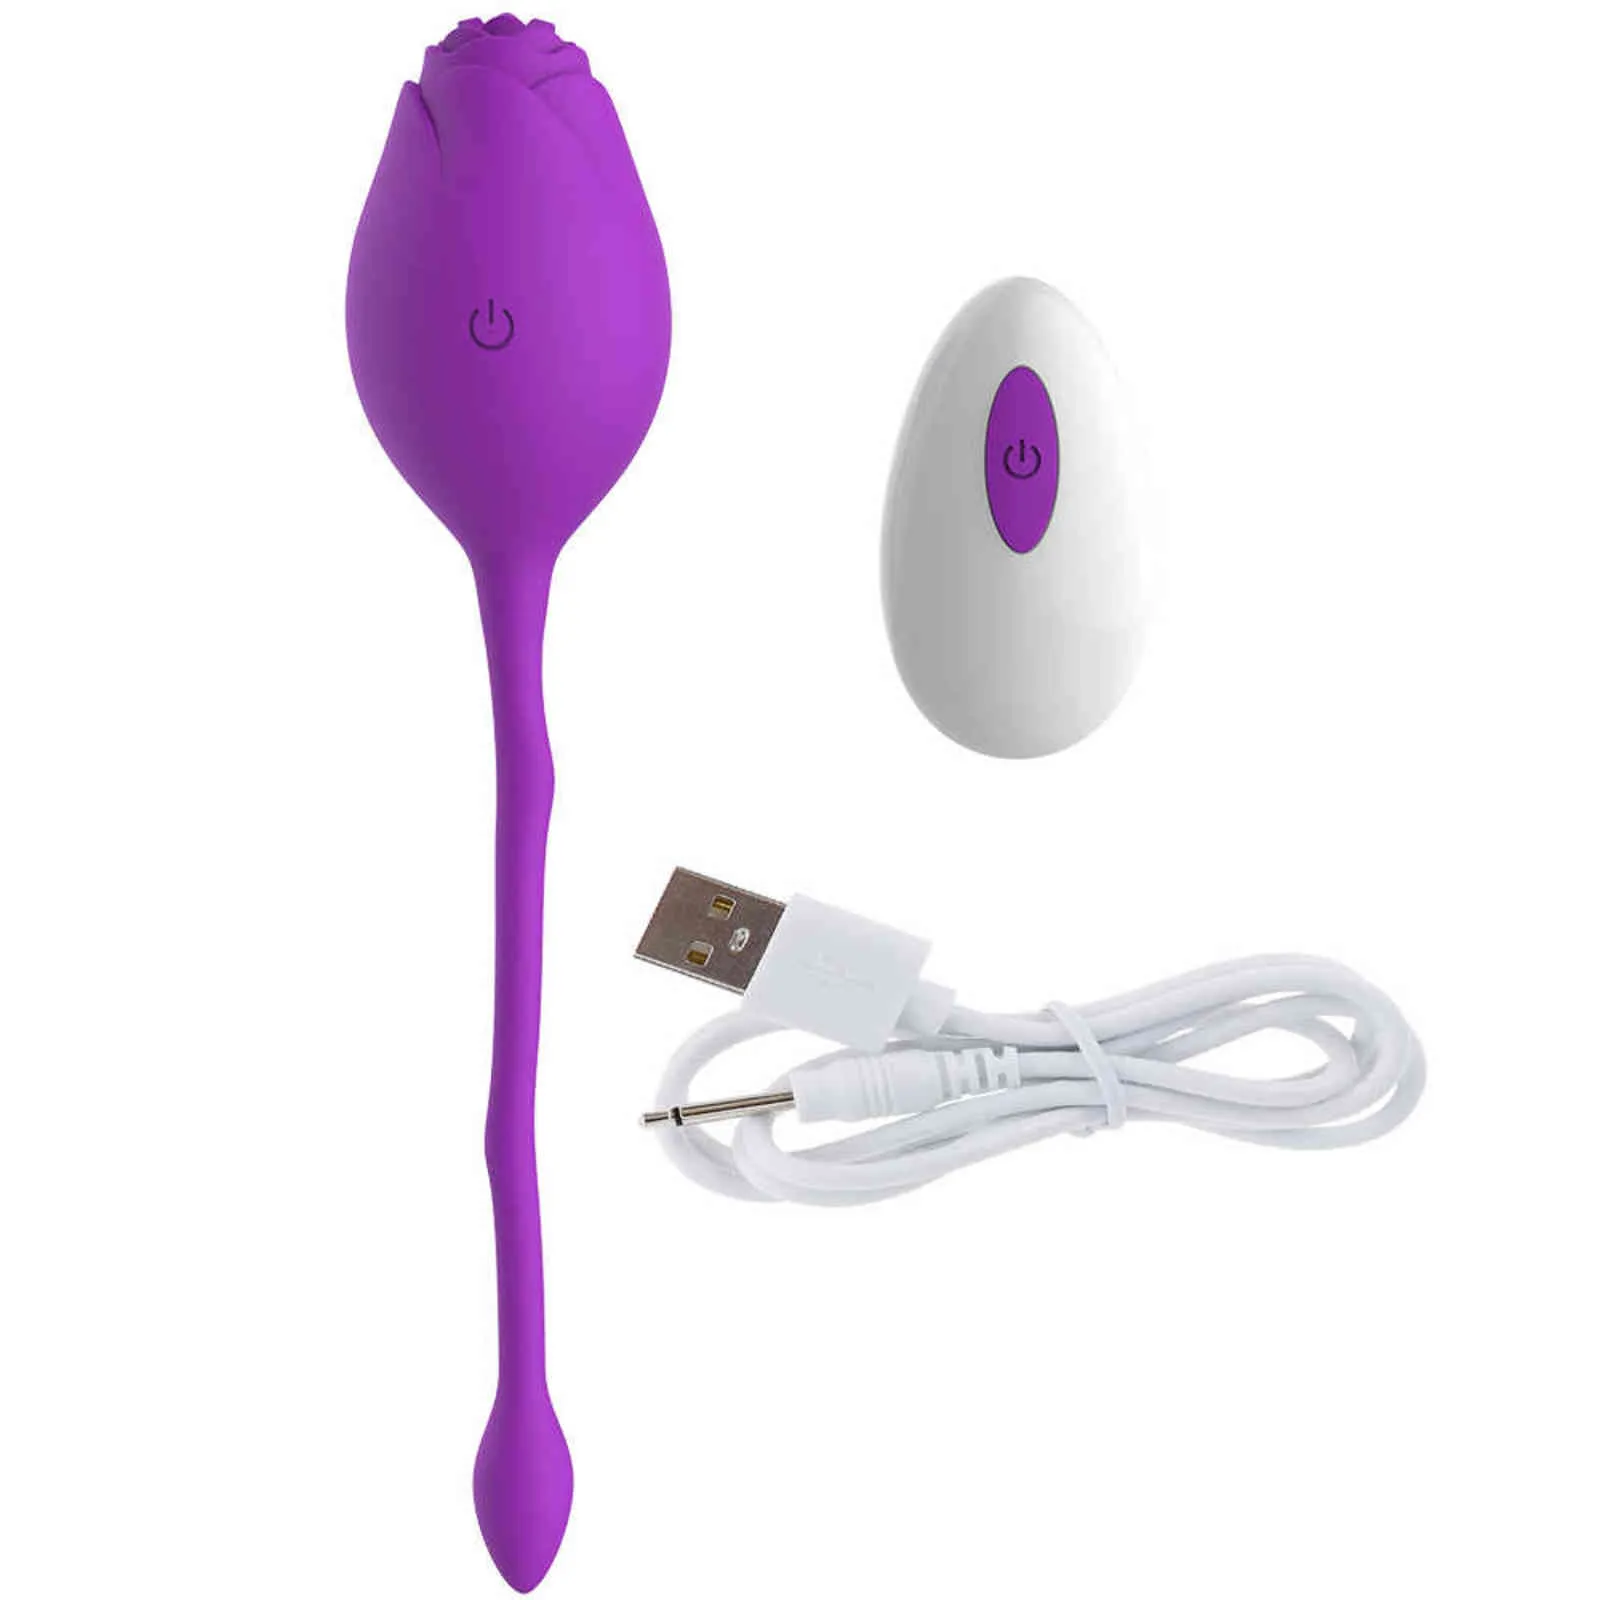 NXY Sex Vibrators Vibrating Eggs Kegel Balls Female Tight Exercise Vagina  Remote Control Adult Toys For Women Rose Porn Toy 1125 From Sexwellness,  $36.43 | DHgate.Com